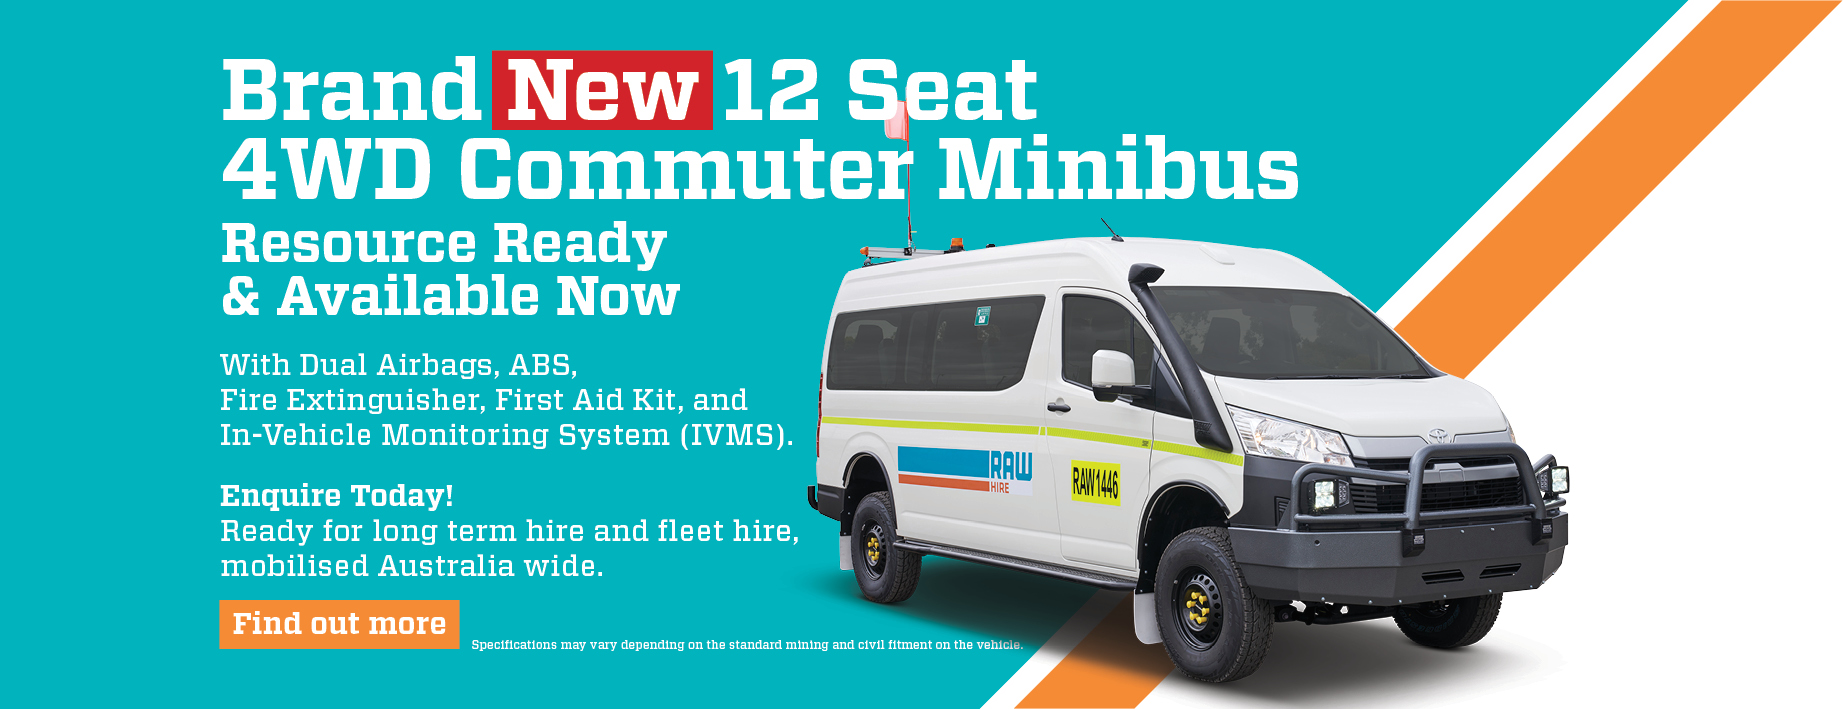 raw hire 12 seat 4wd commuter minibus available now for long term vehicle hire